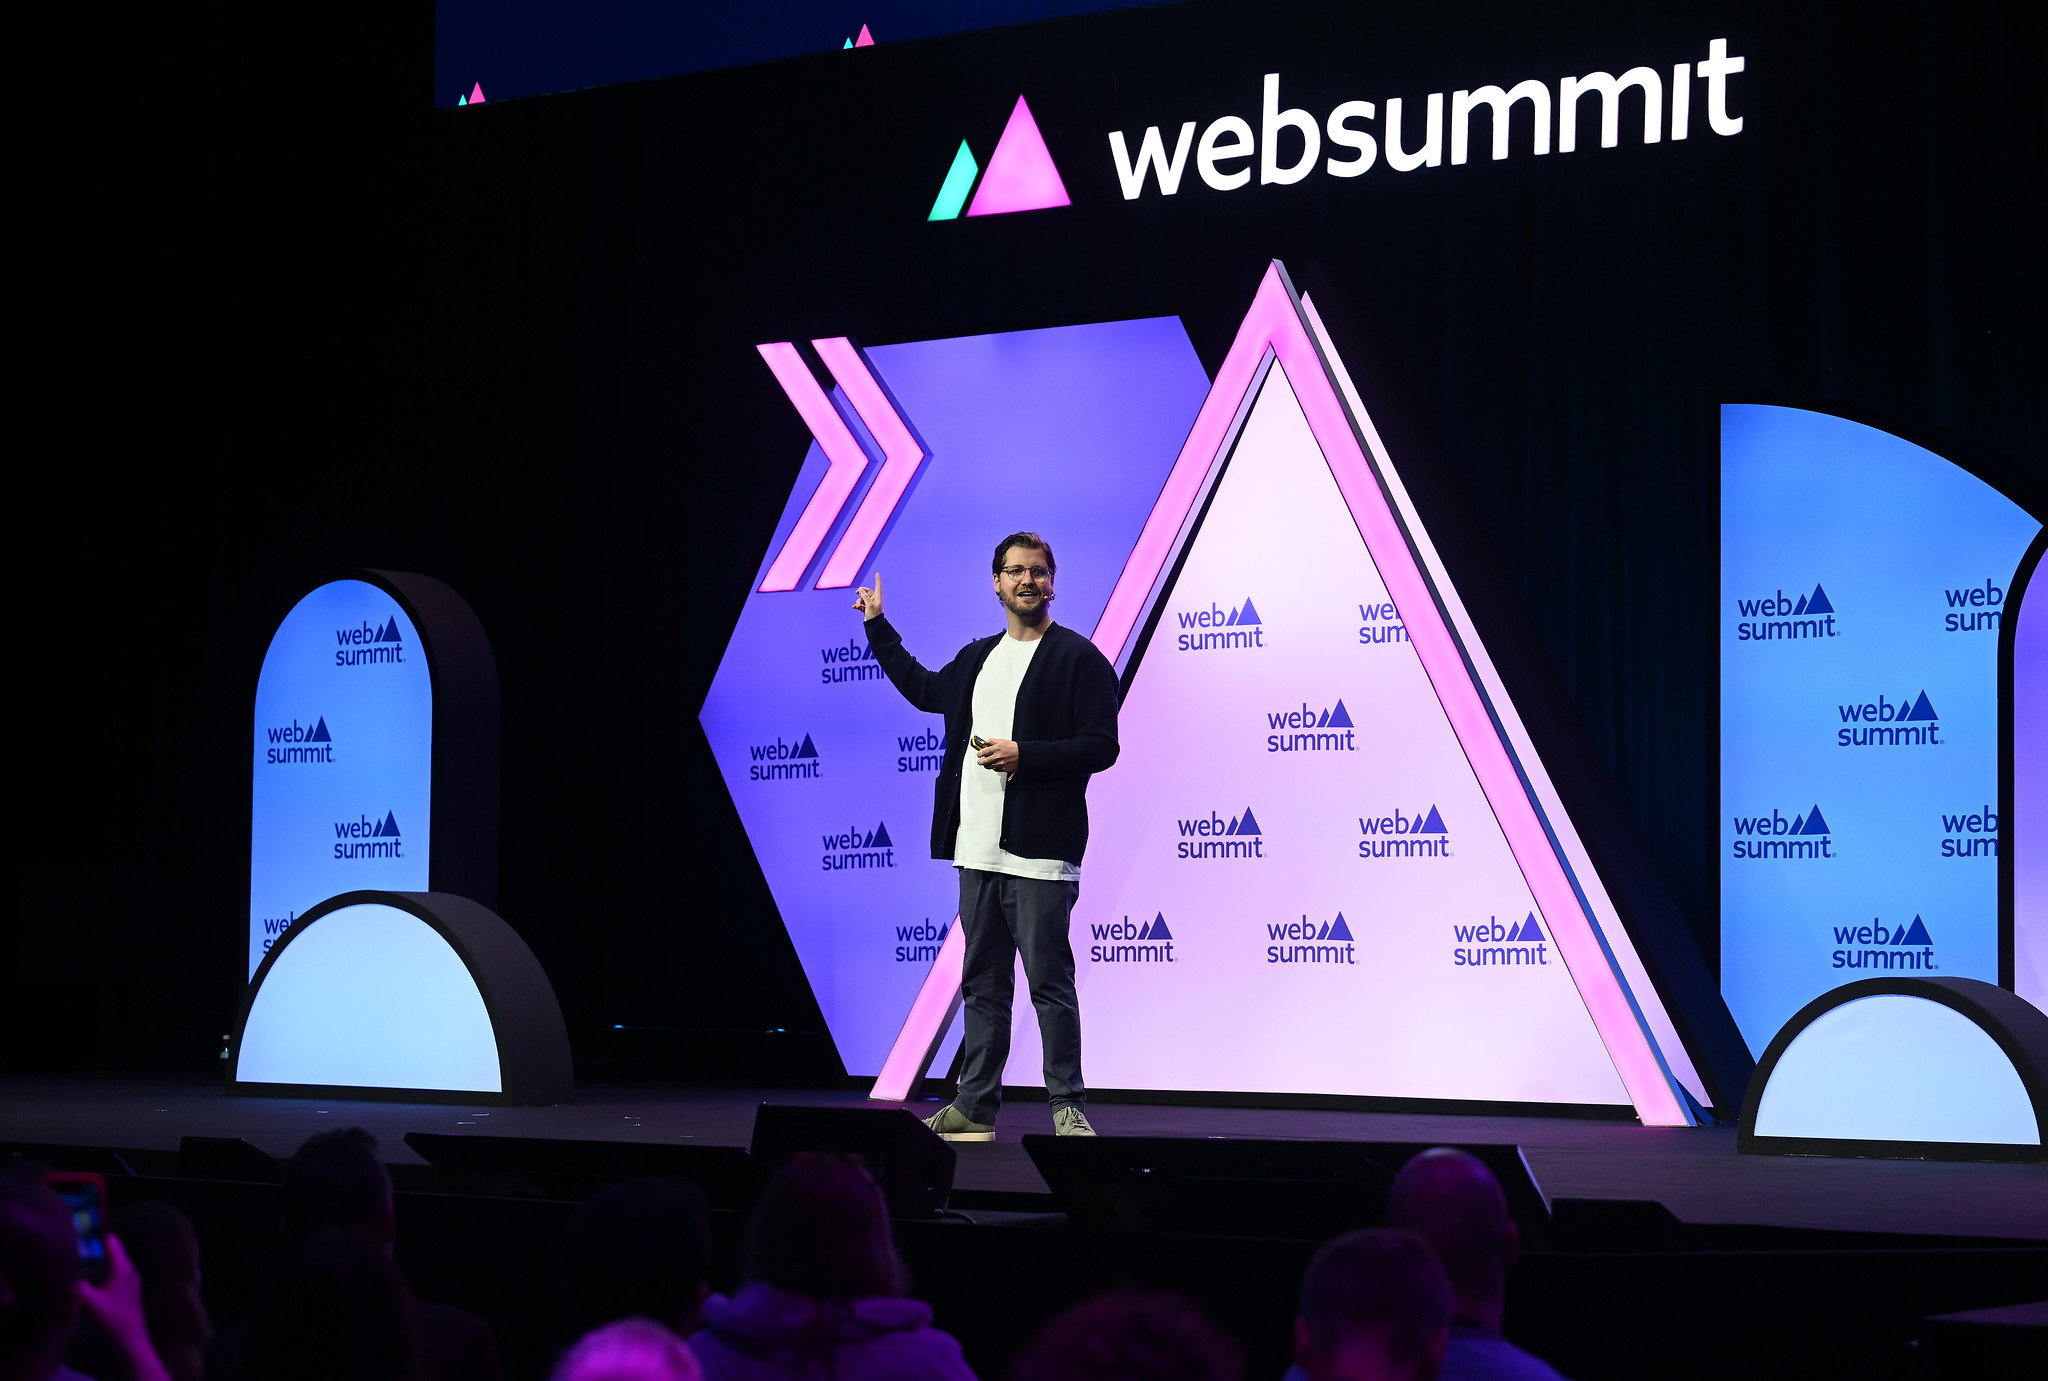 A photograph of Stevie Johnson, managing director of Disrupt, speaking on stage at Web Summit 2023. The photograph is zoomed-out, and there appears to be a crowd of people sitting at the stage. Stevie is standing on stage and appears to be speaking to the audience. The Web Summit logo appears above the stage.